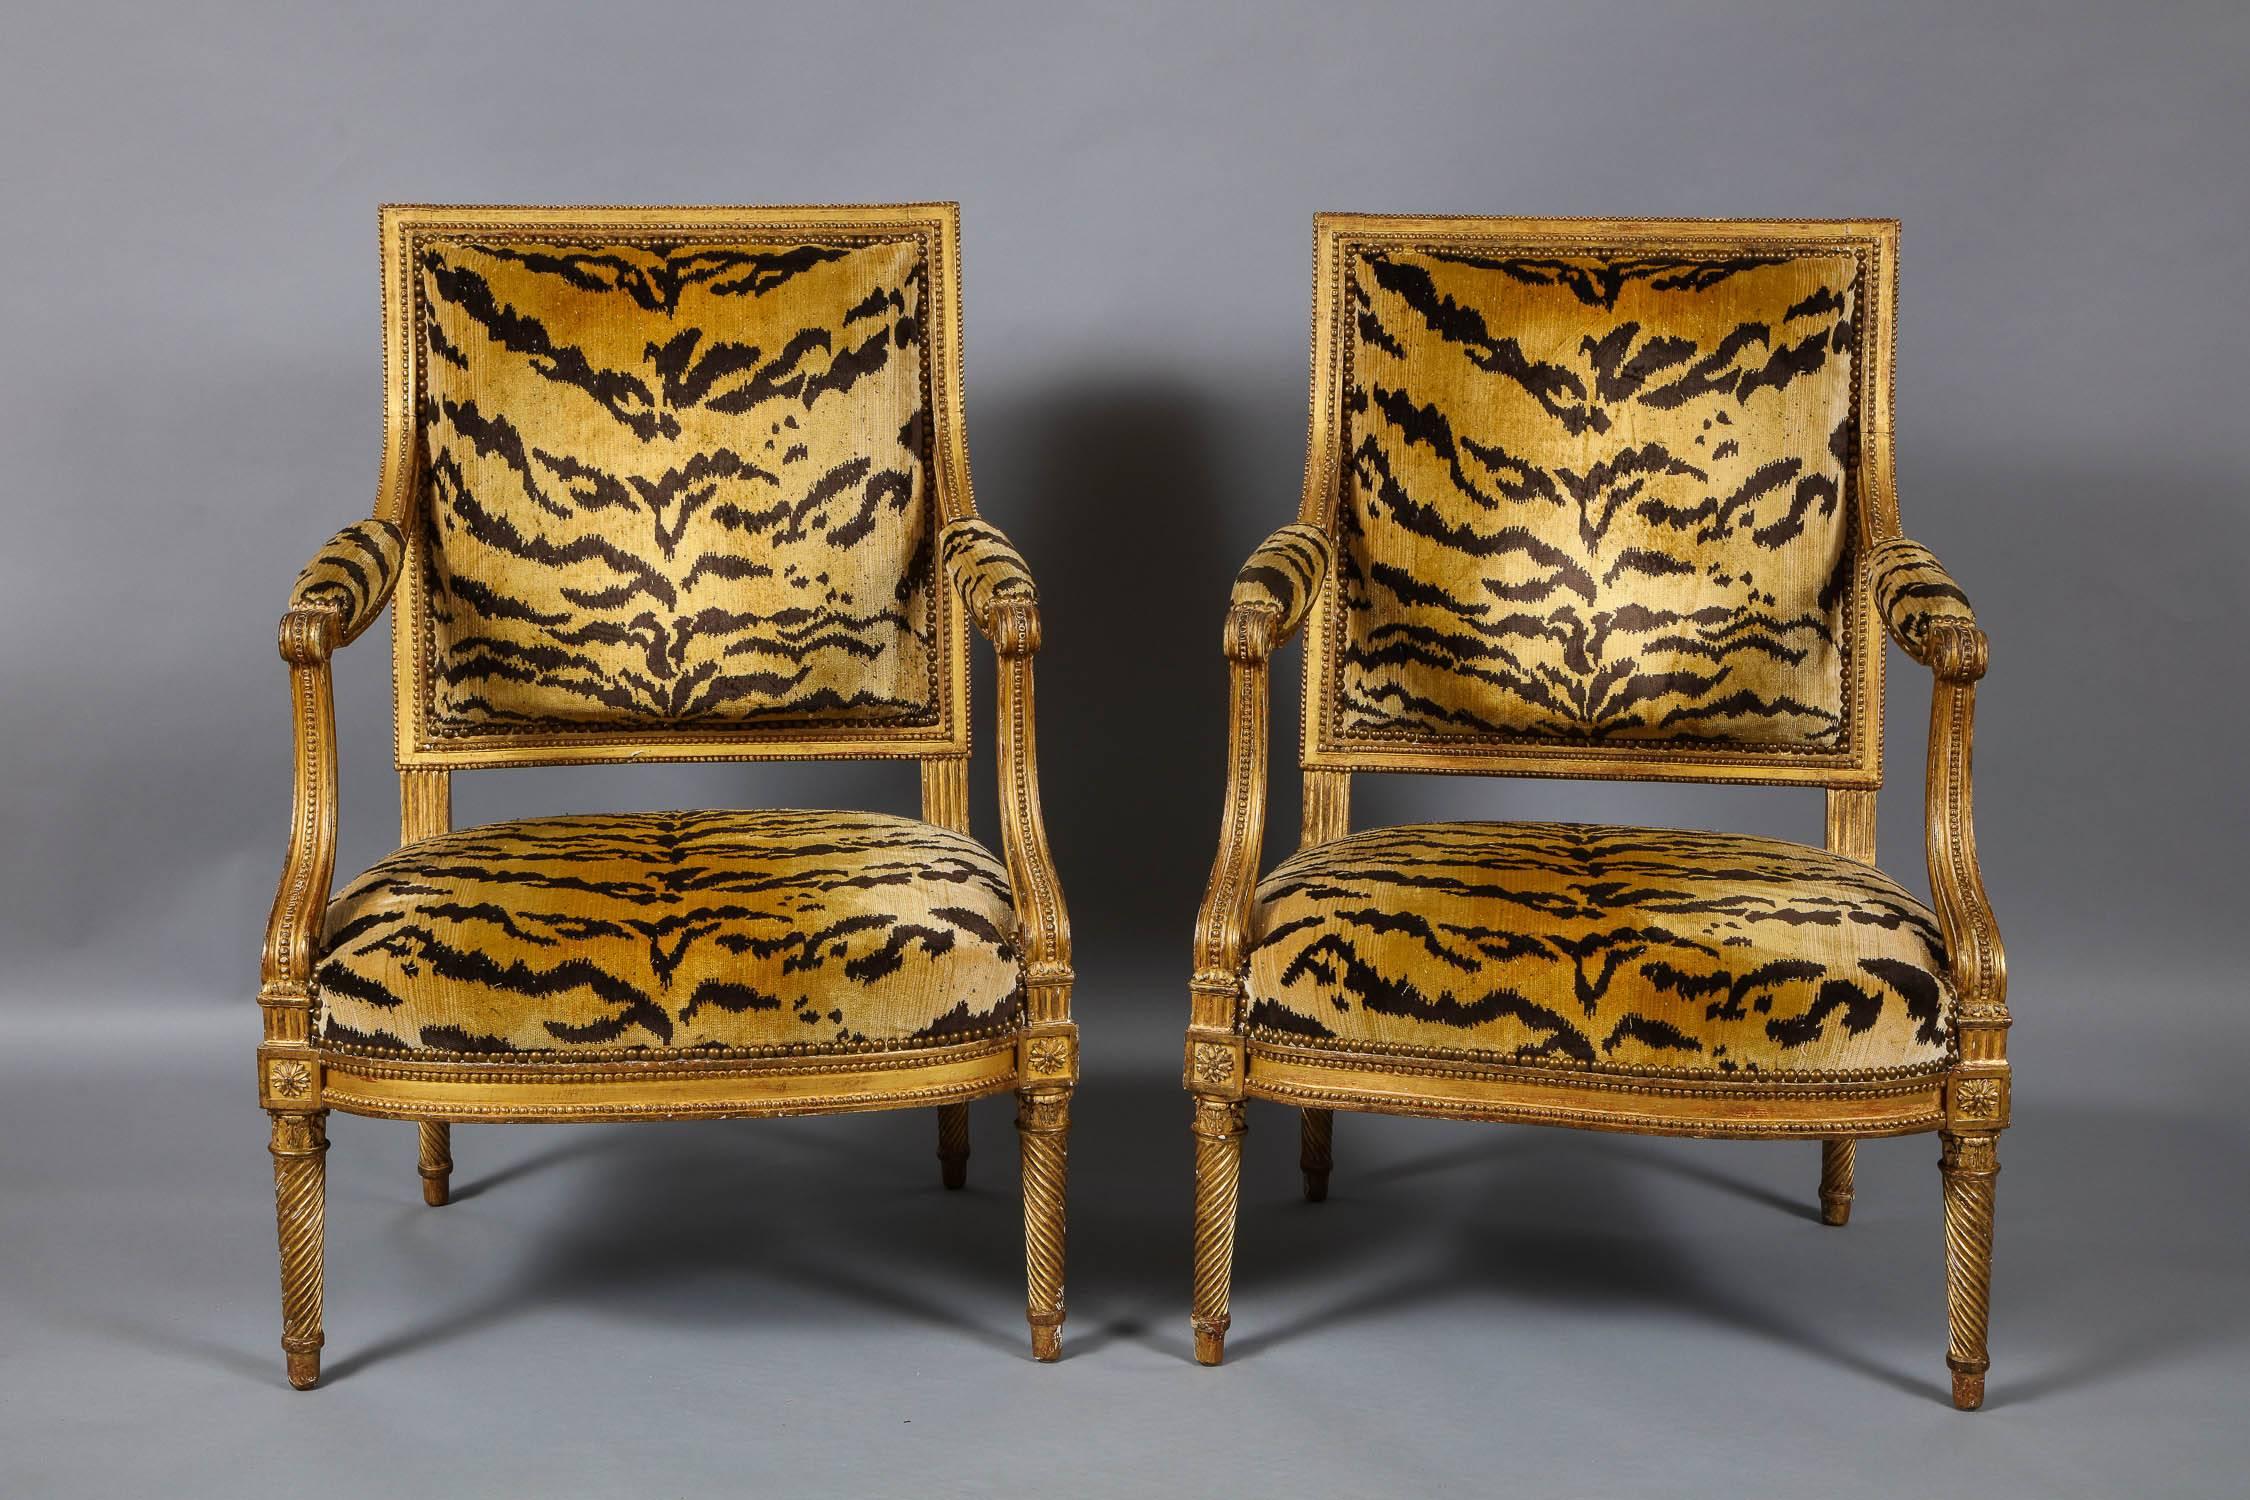 French Important Pair of Louis XVI Giltwood Chairs by Jacob